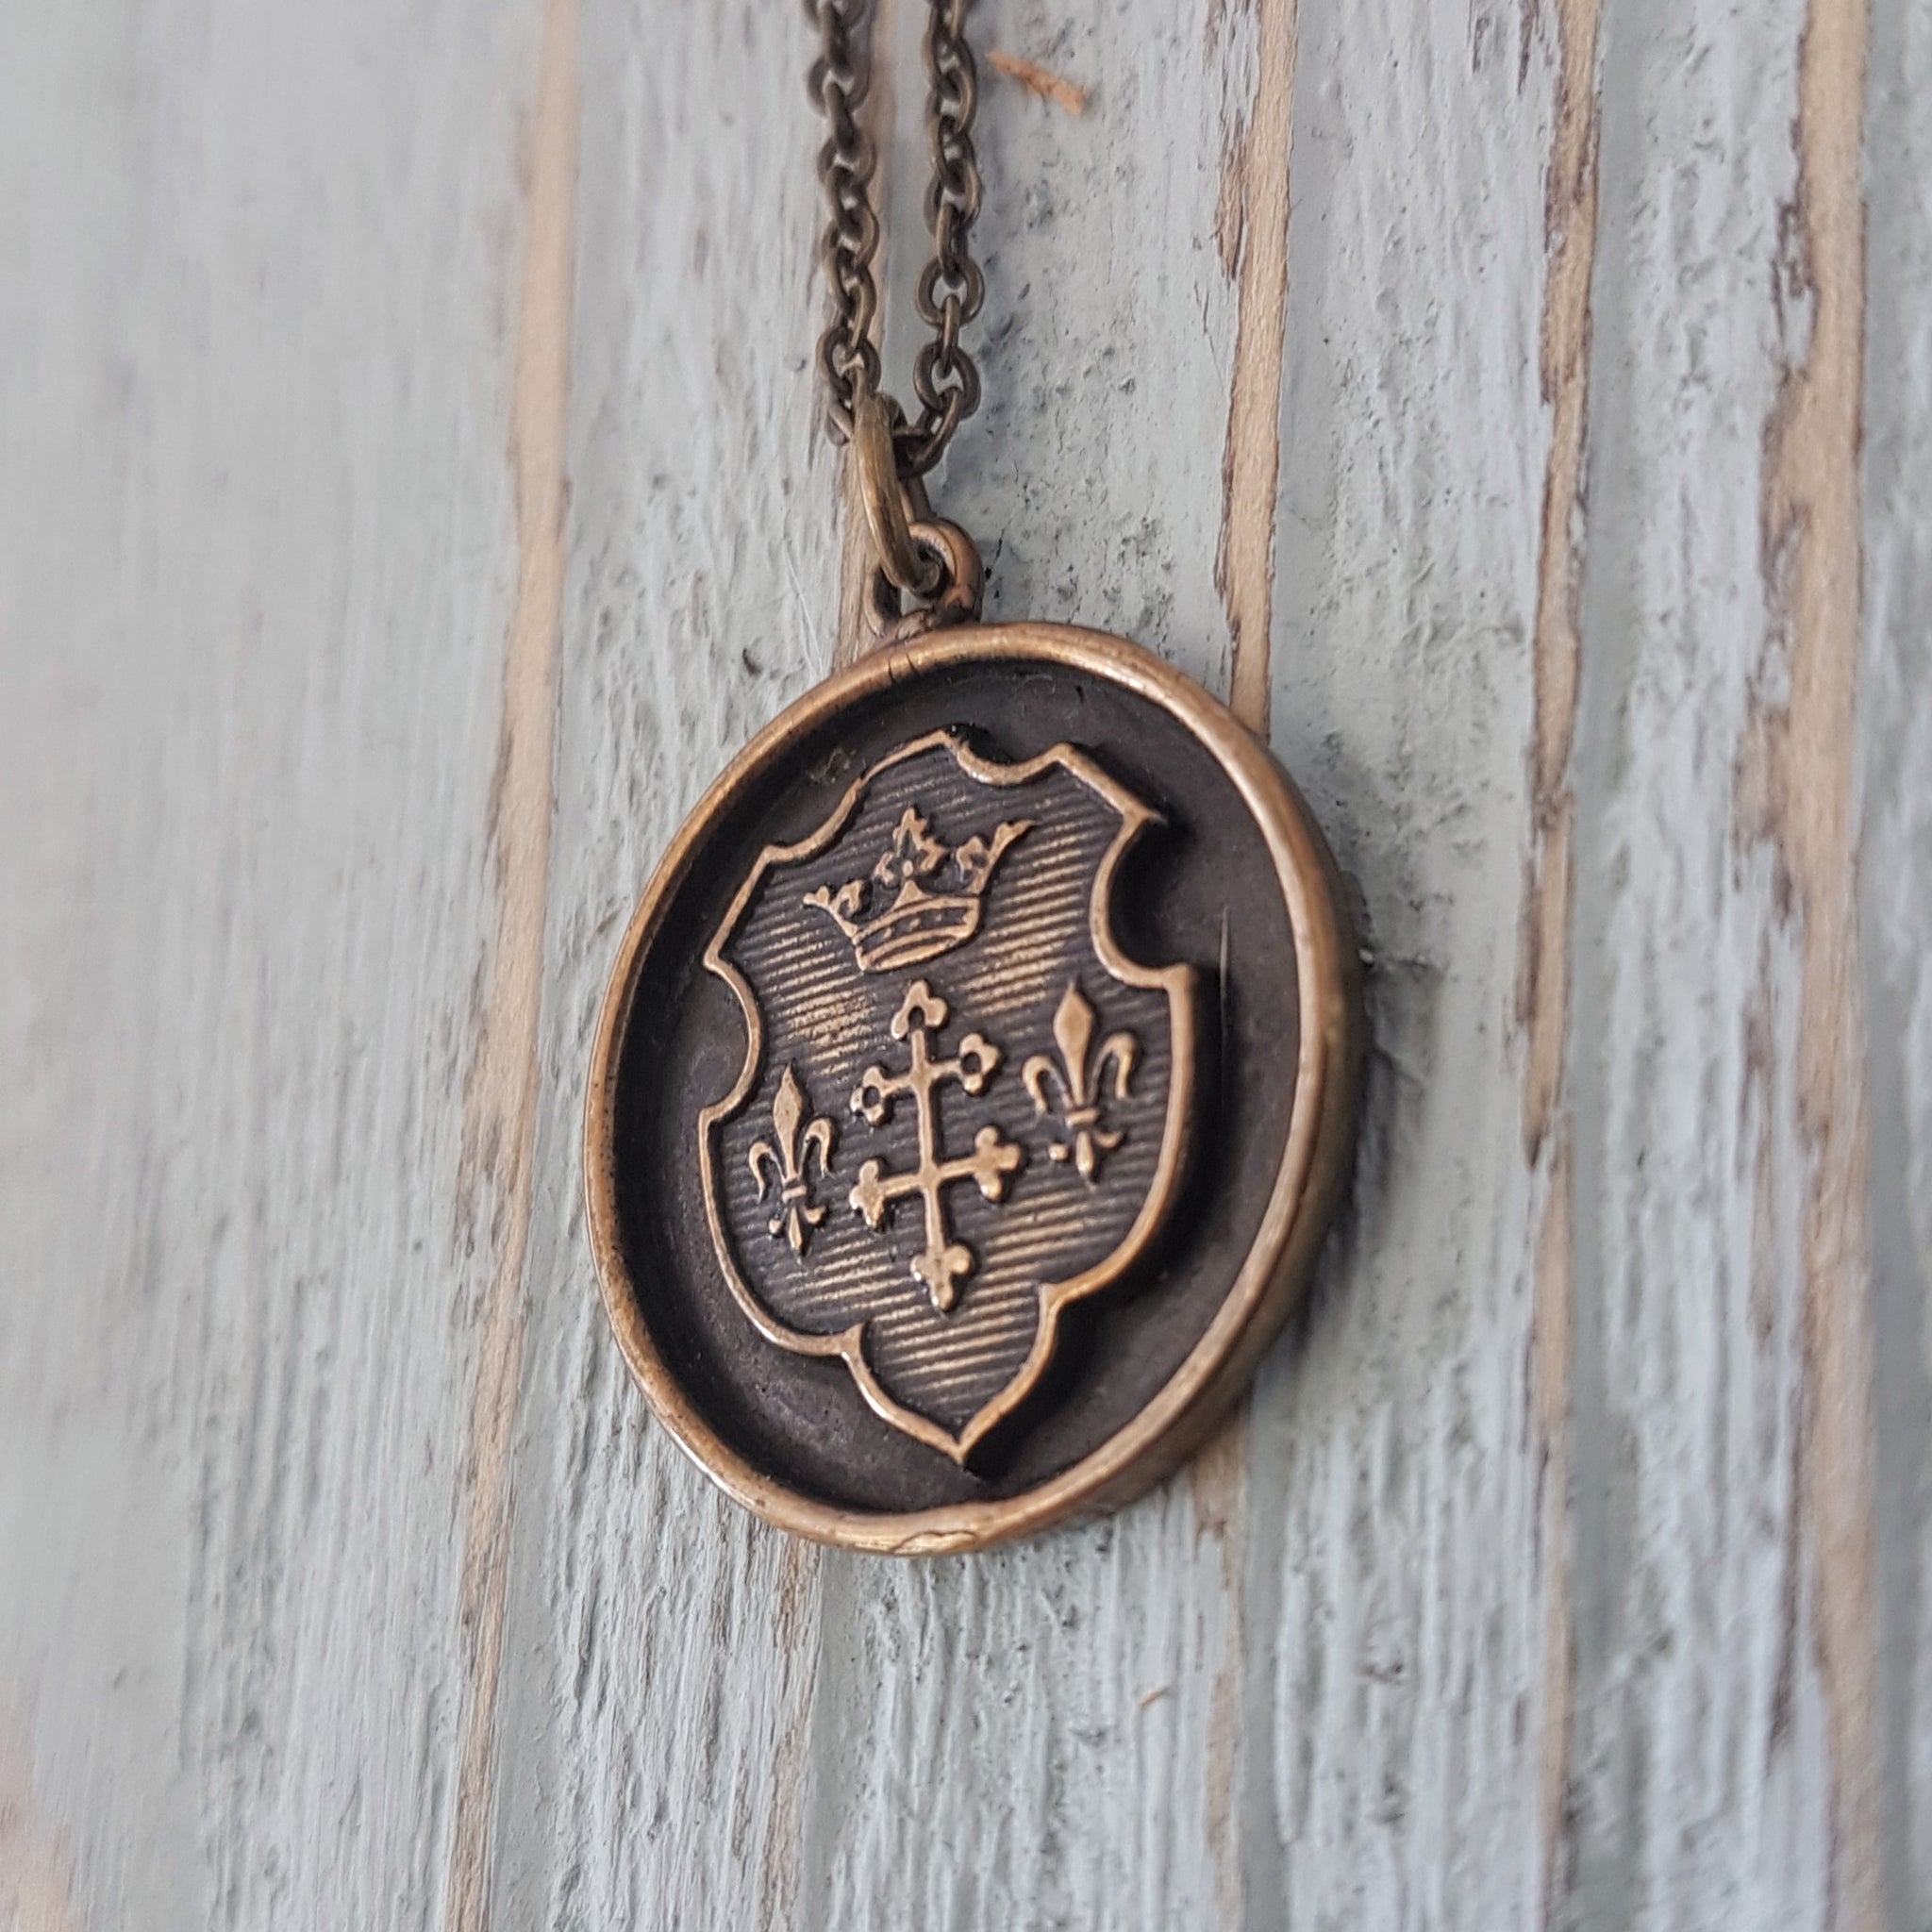 Coat of Arms Wax Seal Necklace - Gwen Delicious Jewelry Designs